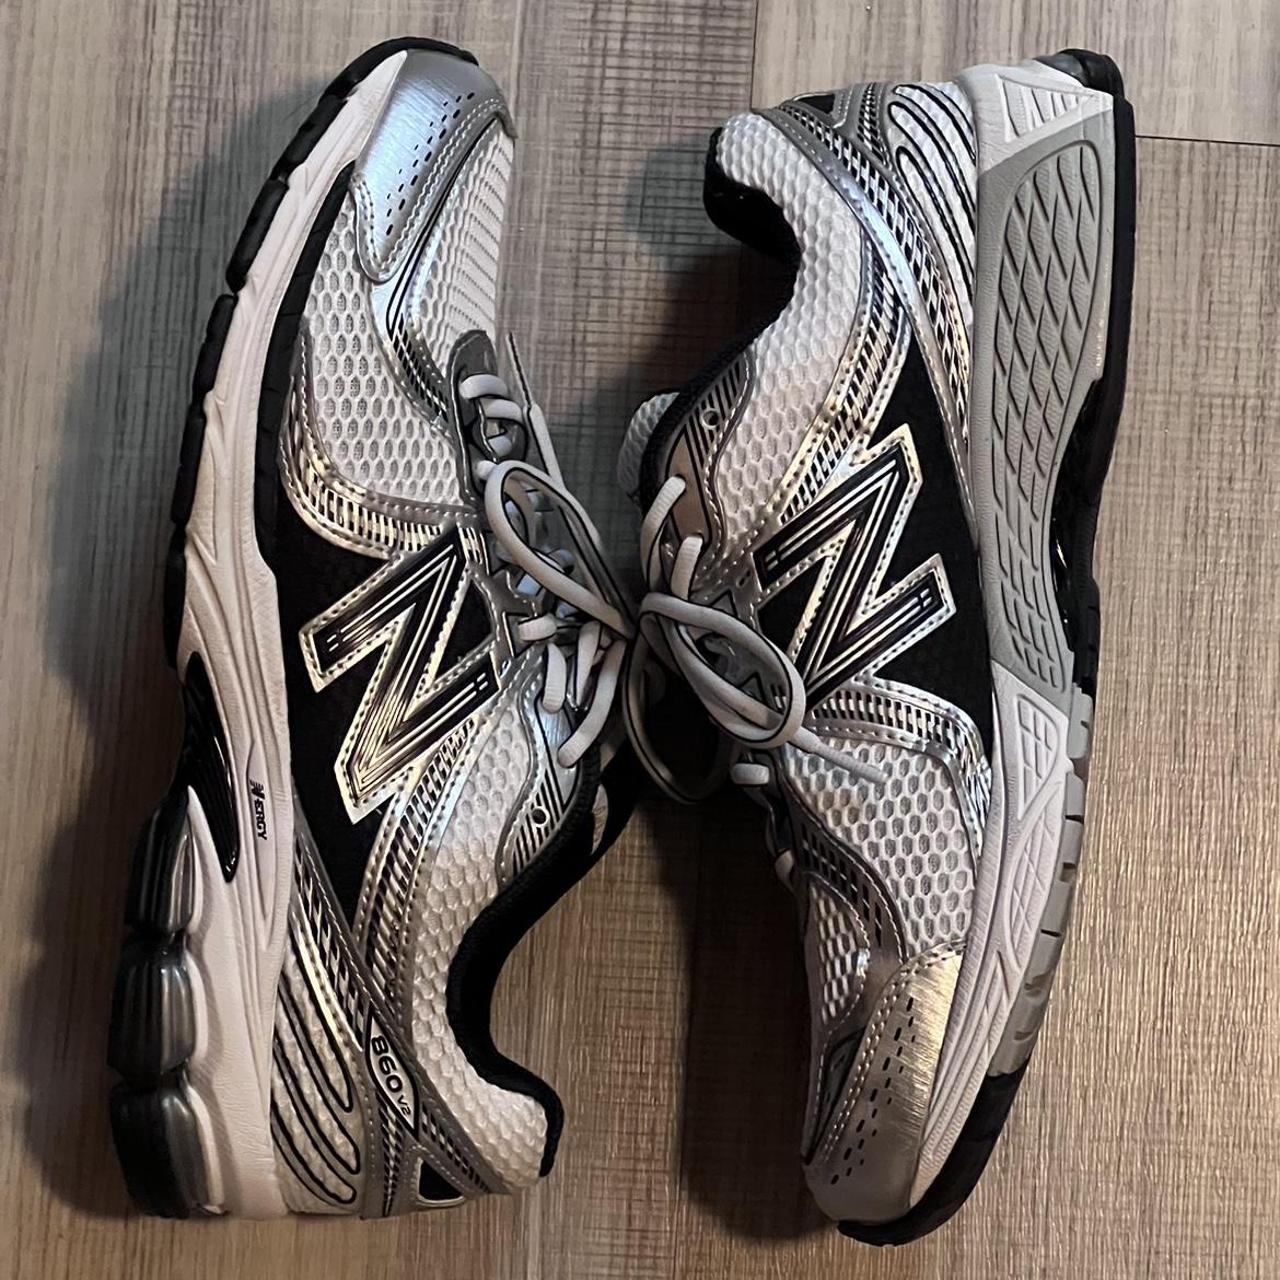 New Balance Men's Silver and Black Trainers